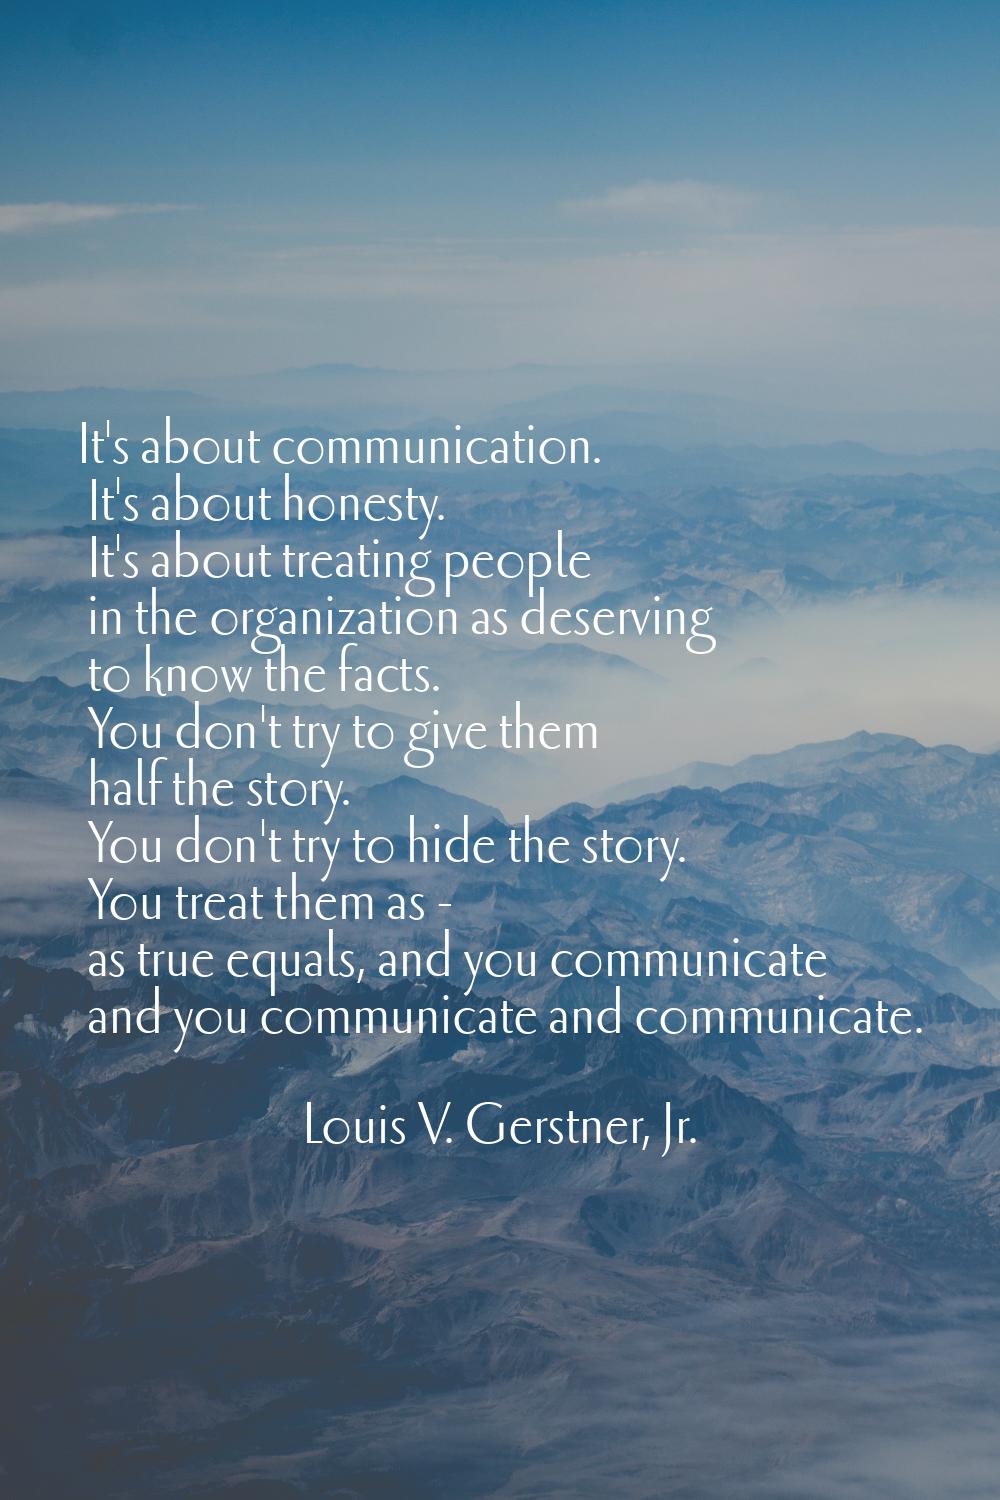 It's about communication. It's about honesty. It's about treating people in the organization as des